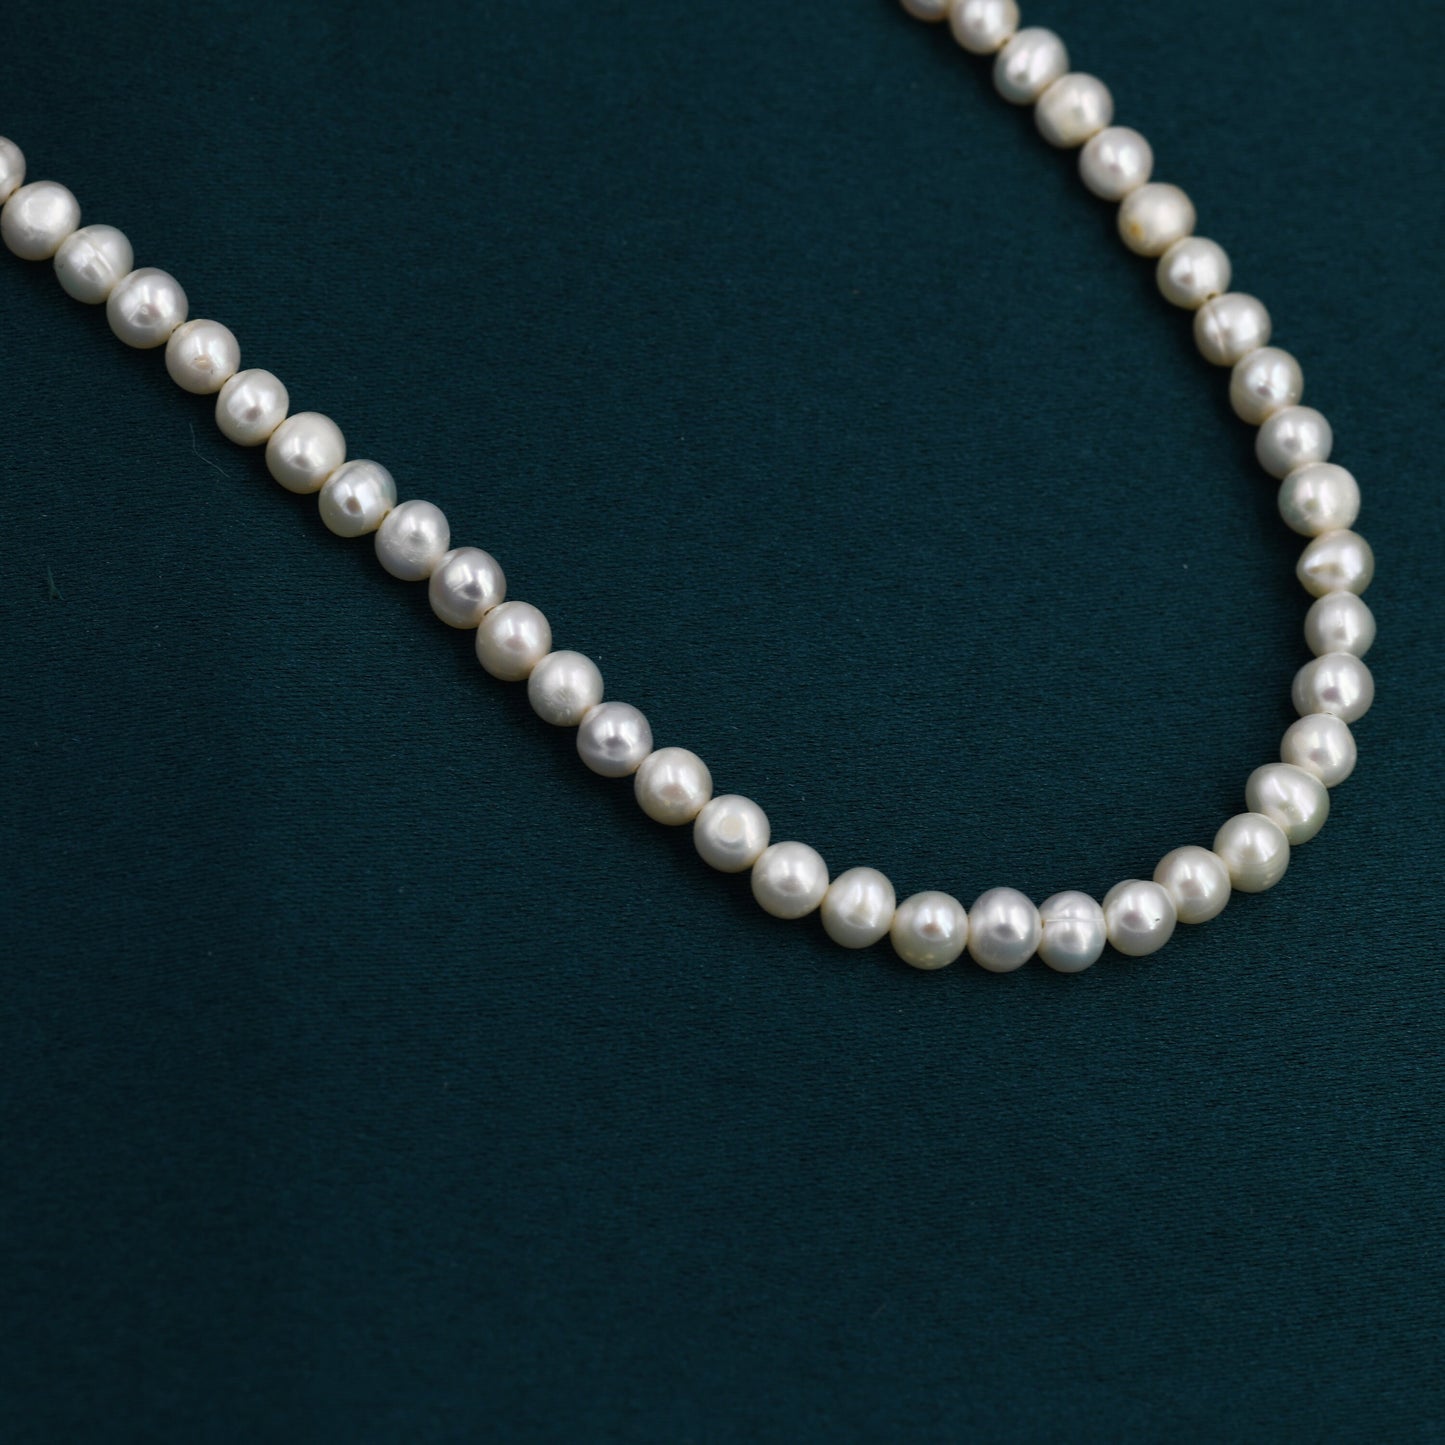 Genuine Freshwater Pearl Necklace in Sterling Silver, Slightly Irregular Shape 4mm Round Fresh Water Pearl Necklace, Men or Women, Unisex